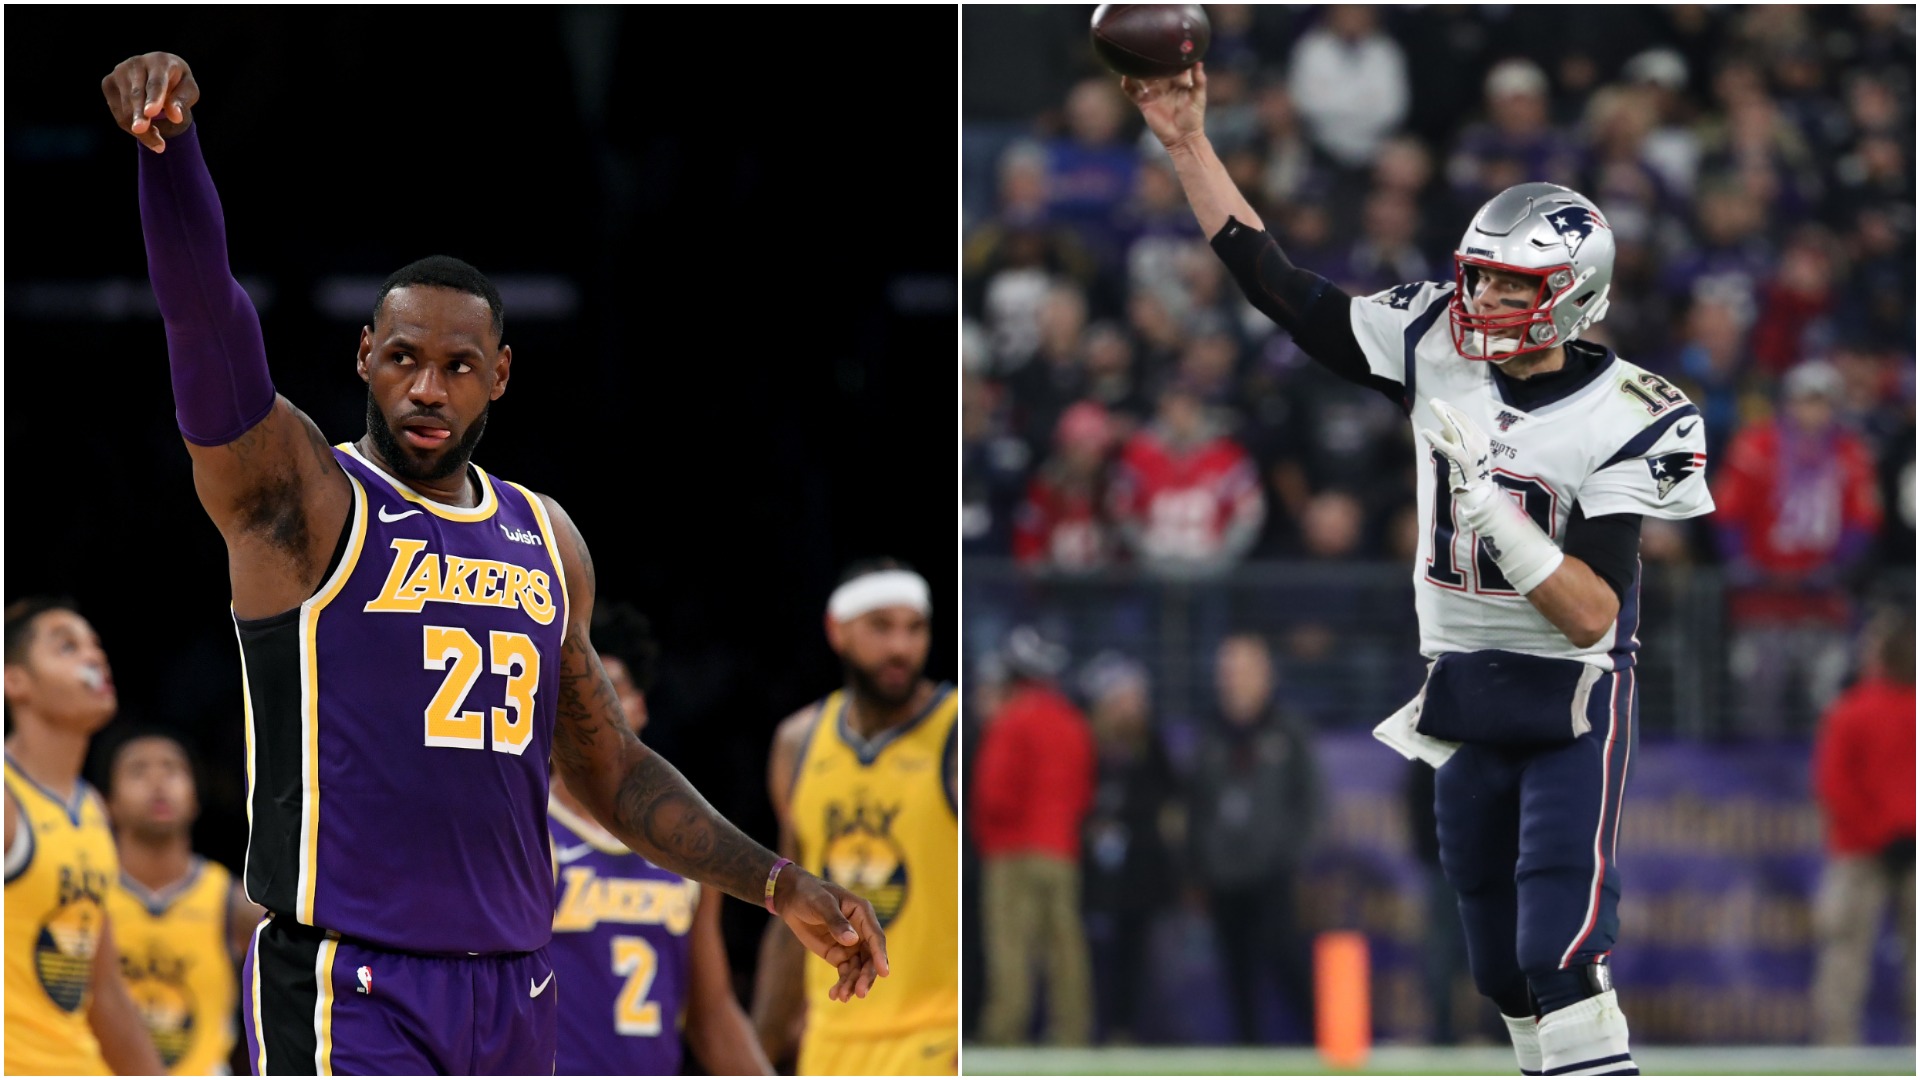 LeBron James has claimed he and Tom Brady are "one in the same" after affirming he has no plans to retire from the NBA.